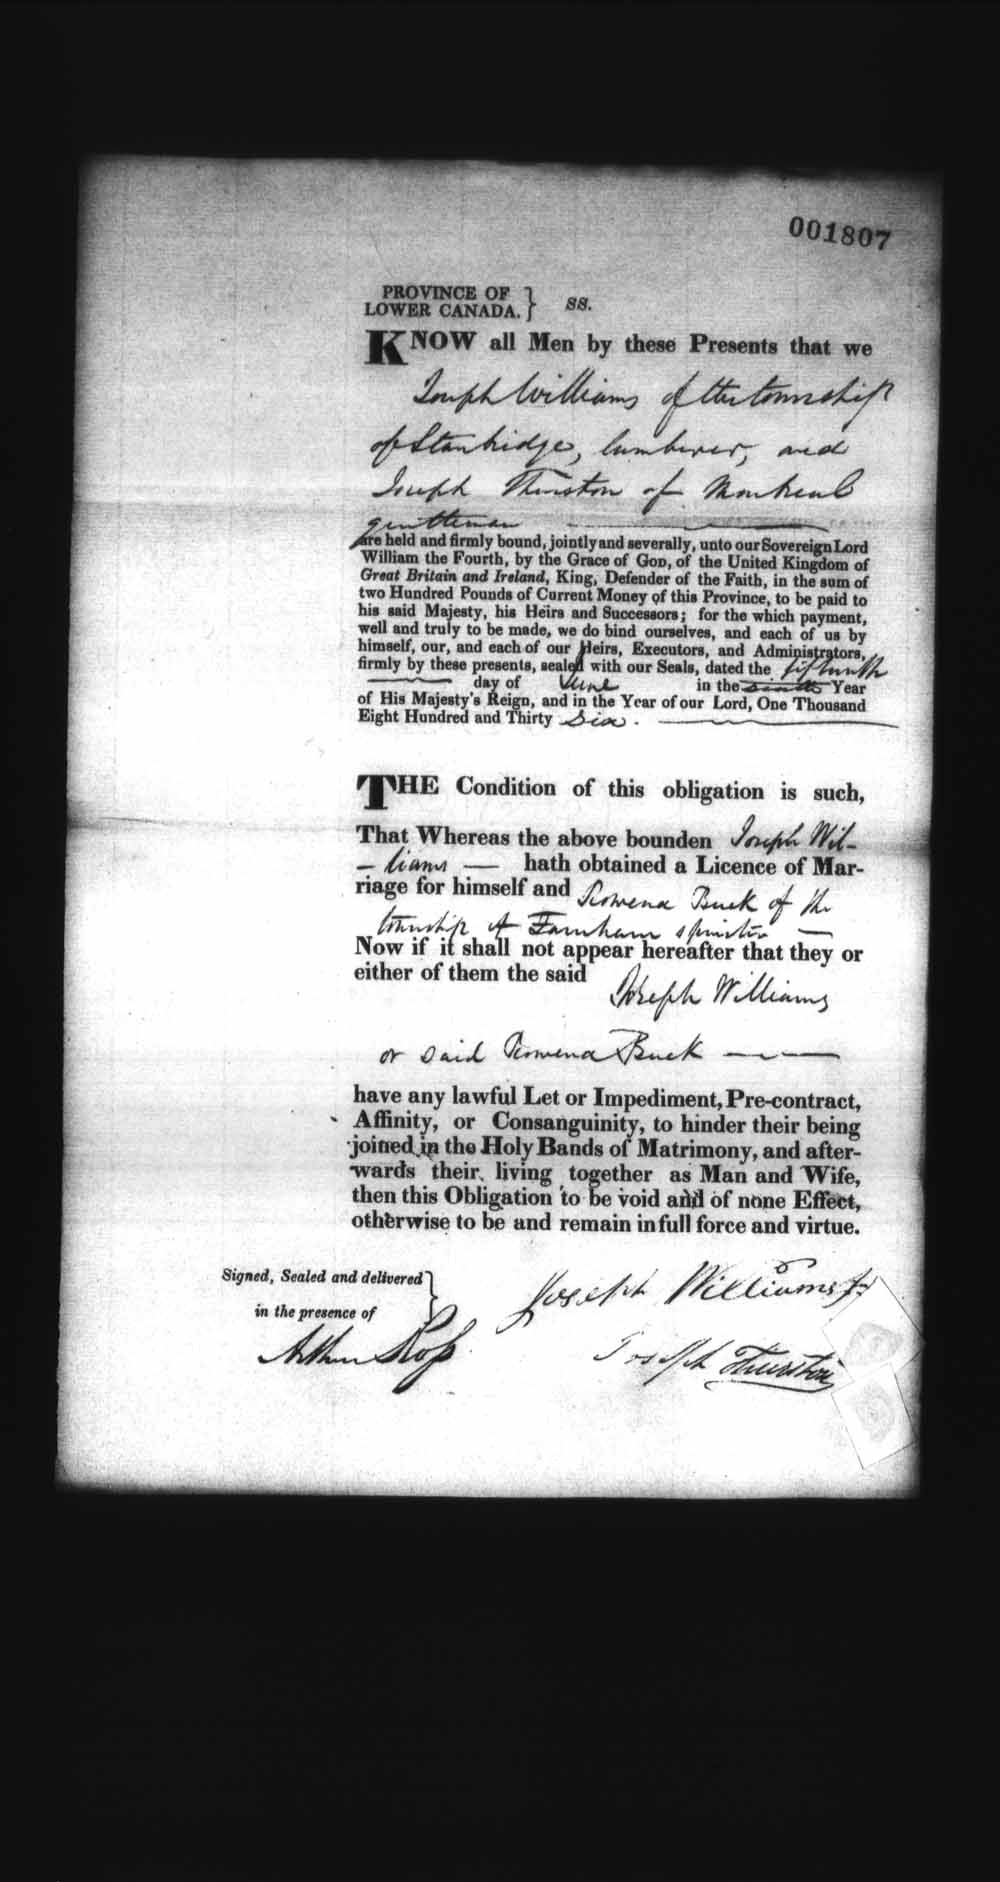 Digitized page of Upper and Lower Canada Marriage Bonds (1779-1865) for Image No.: e008238135